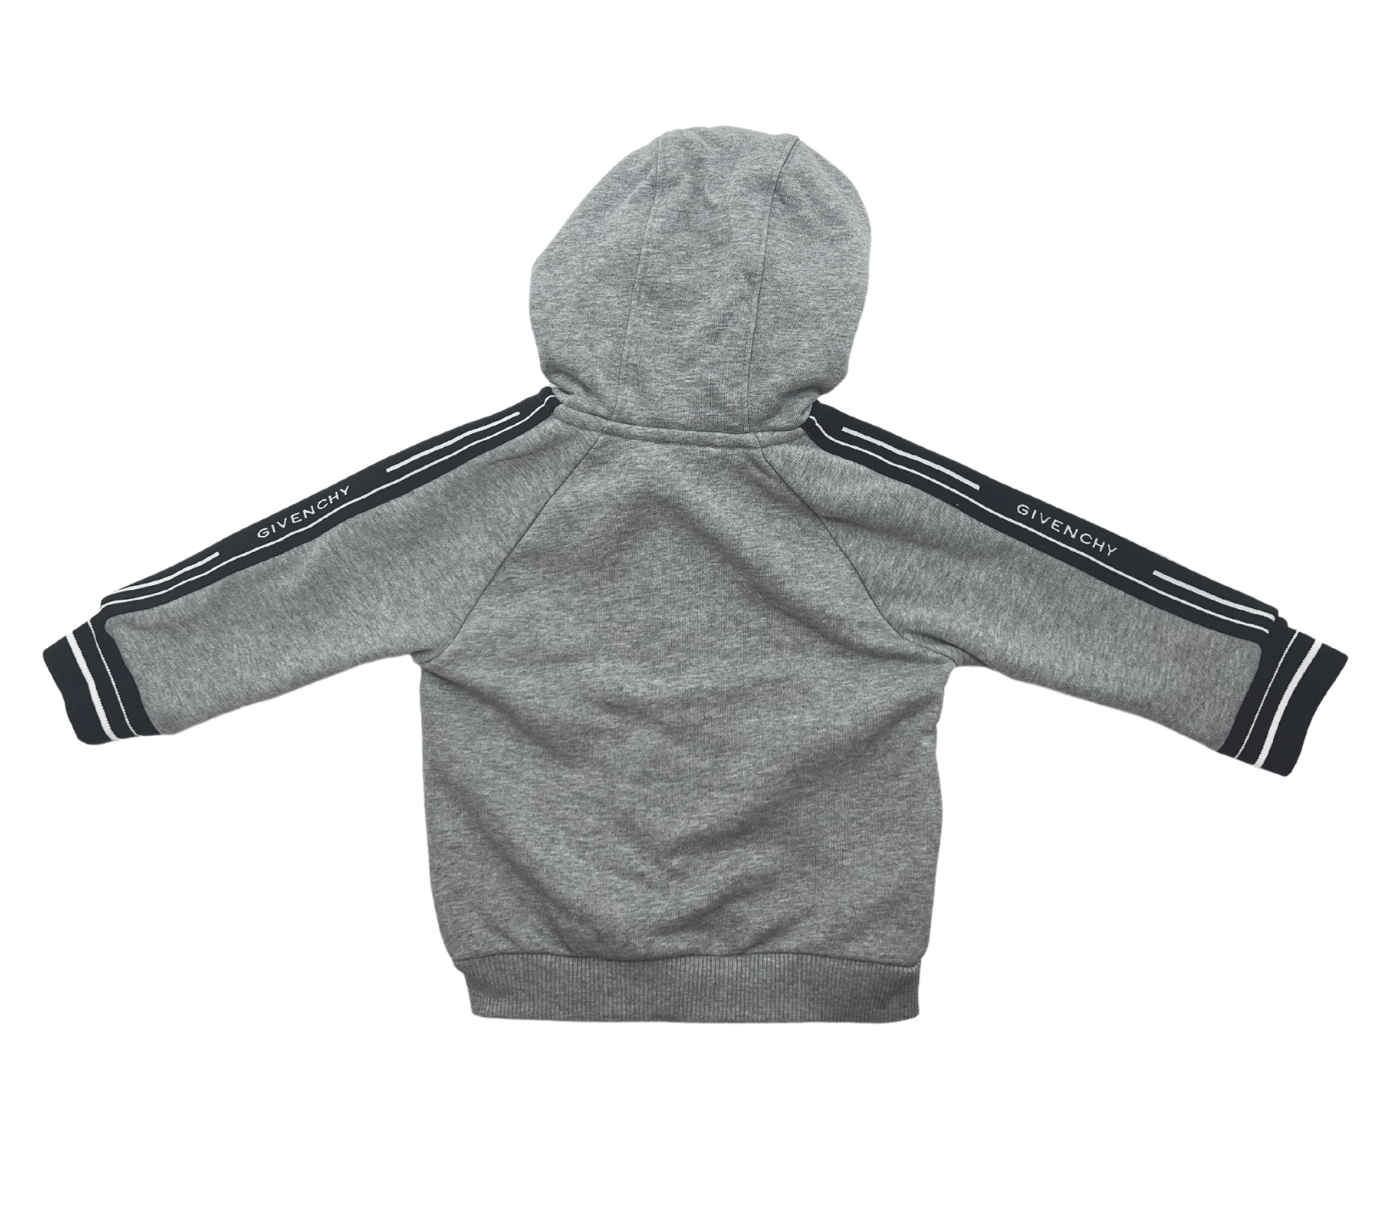 GIVENCHY - Gray hoodie with logo on the sleeves - 1 year old